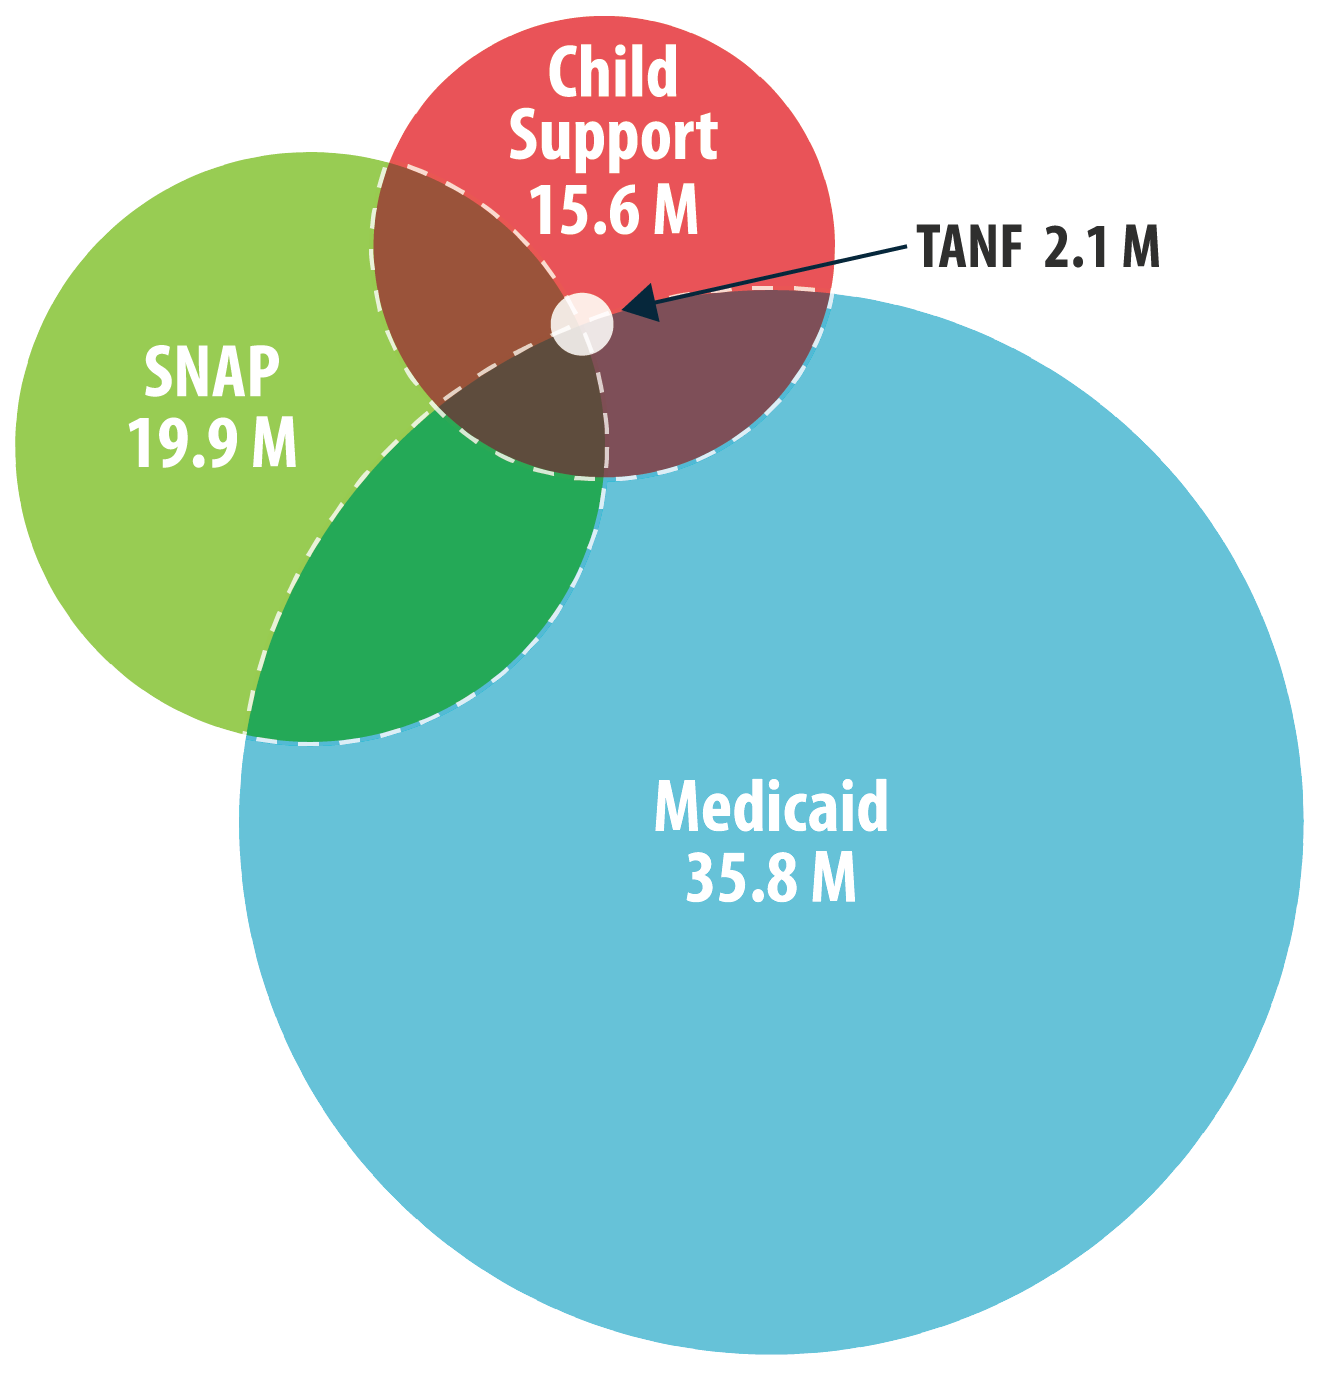 This graphic displays a Venn diagram showing the numbers of children in the Medicaid, SNAP, child support, and TANF programs. The largest circle is Medicaid, serving 35.8 million children. The second largest circle is SNAP, serving 19.9 million children, followed by a smaller, red circle representing child support serving 15.6 million children, and the smallest, white circle representing TANF serving 2.1 million. Medicaid, SNAP, and child support all overlap with one another. The TANF circle is enclosed within the child support circle at the point where it overlaps with the other programs, showing that children served by TANF are always enrolled in the child support program, and sometimes enrolled in SNAP and Medicaid.